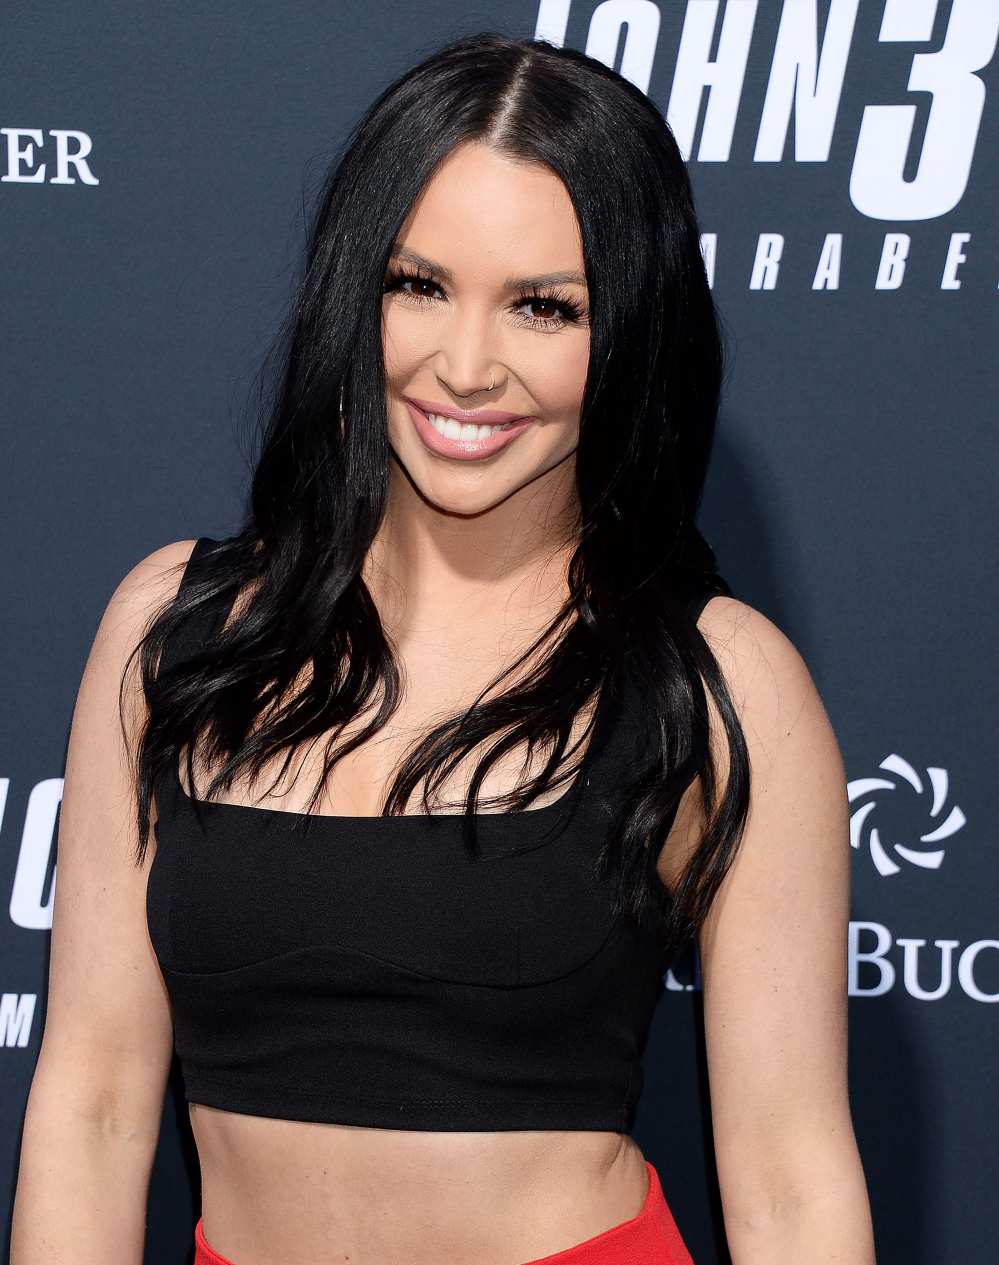 Pregnant Scheana Shay Claps Back at Troll Calling Her Too ‘Dumb’ to Have Kids